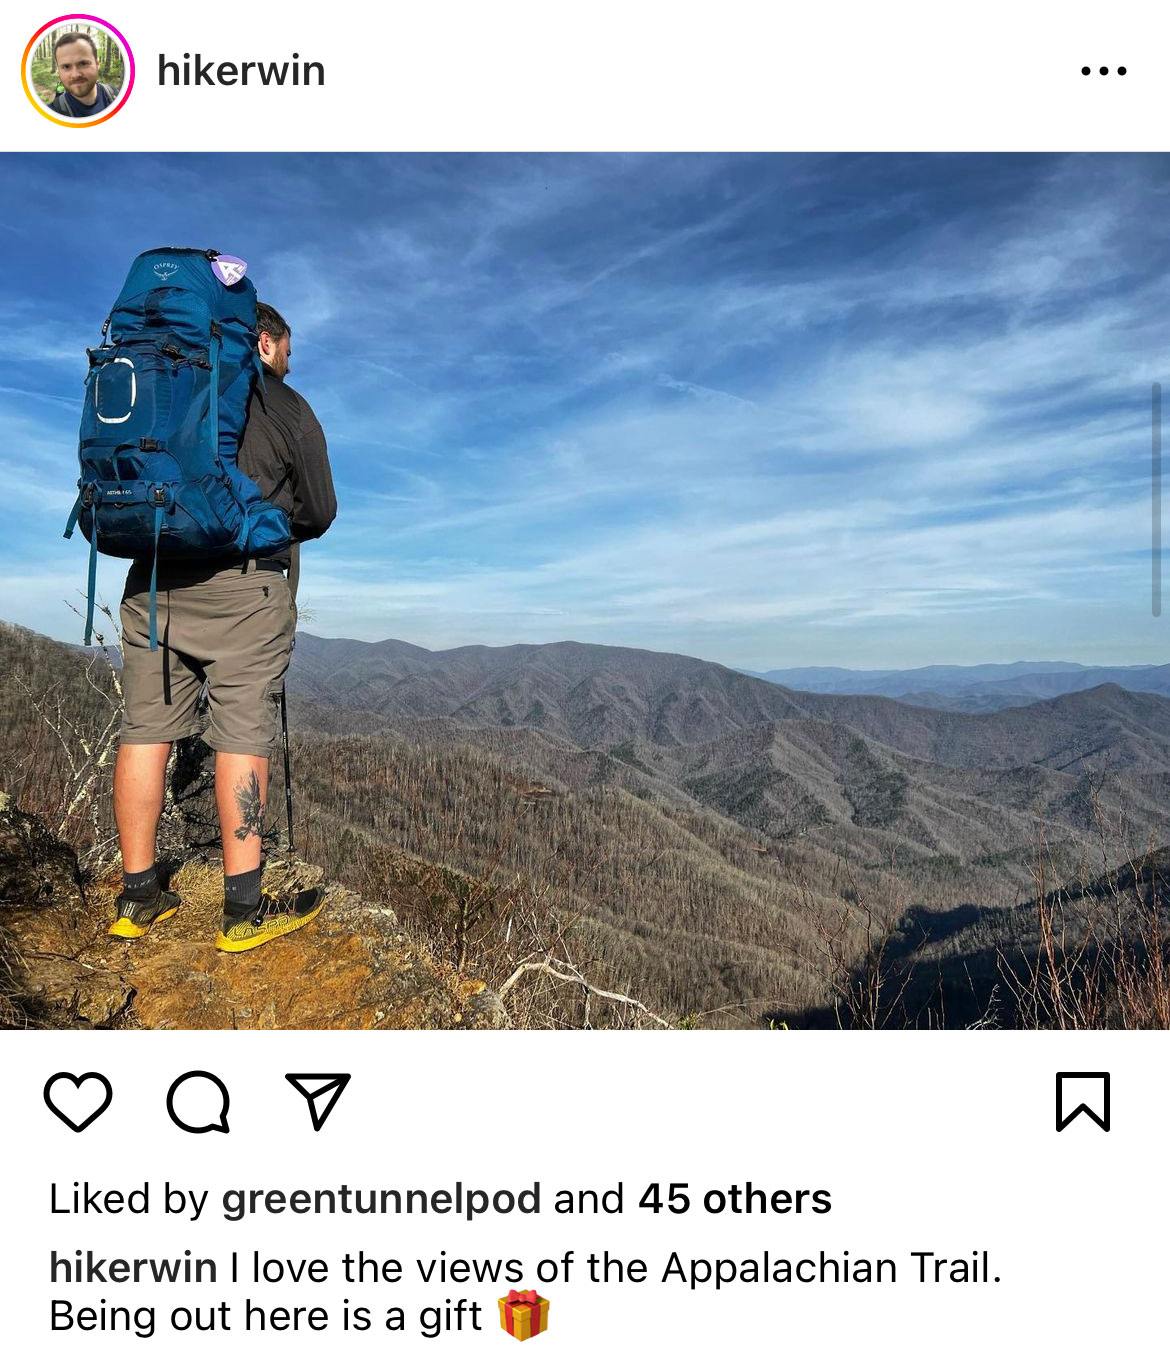 @hikerwin shares a photo celebrating the beauty of the A.T.